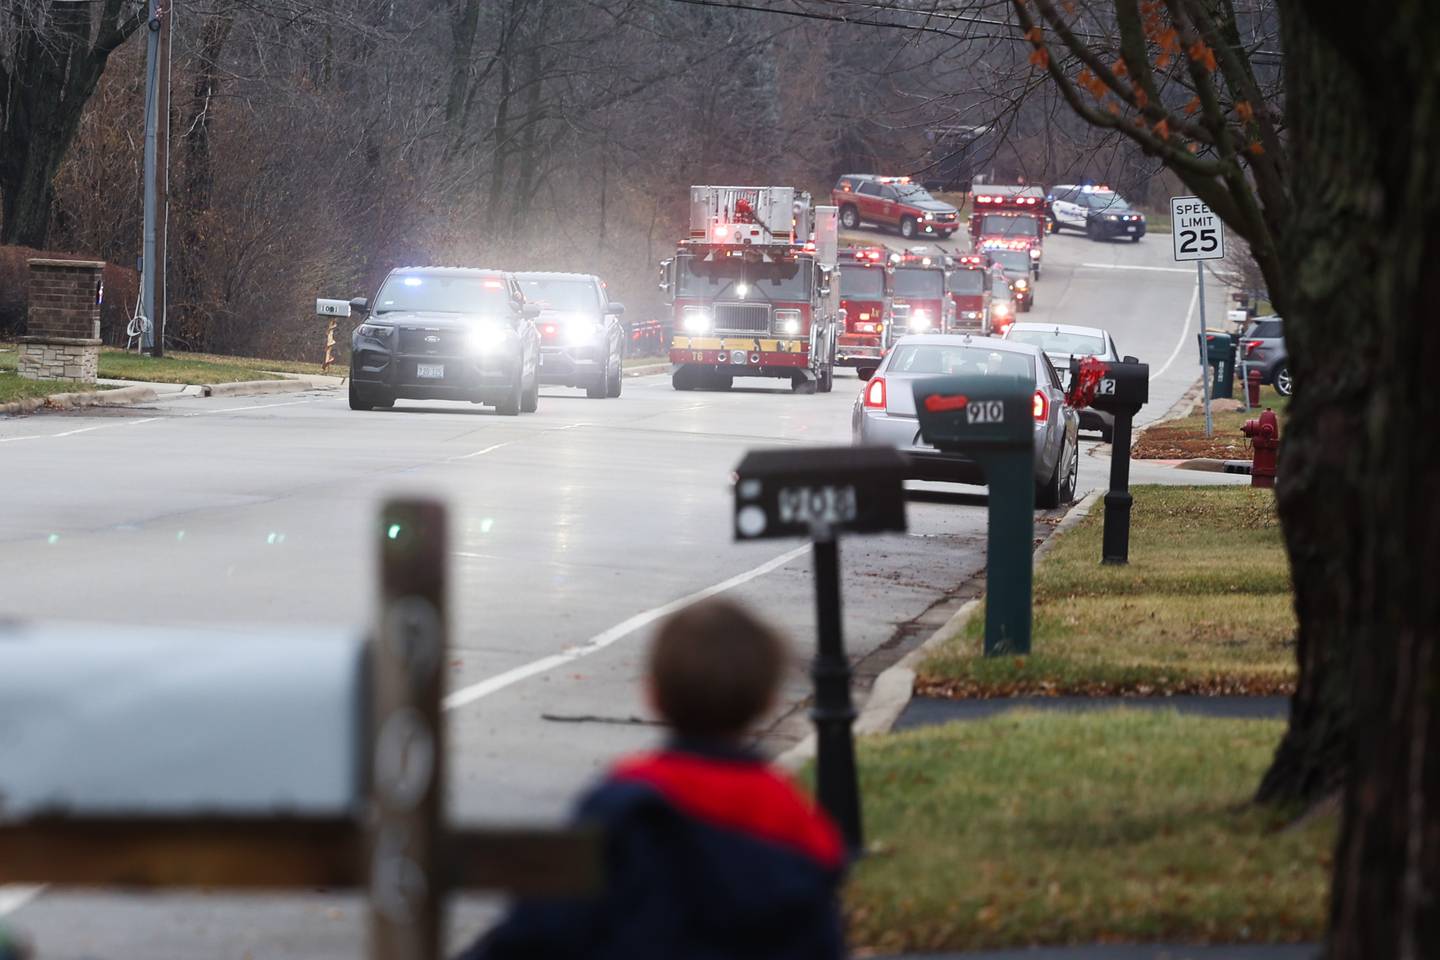 Gage Jenicek, 5, watches as a parade of Lockport police, fire department and volunteer vehicles come to deliver gifts to the Jenicek family on Saturday, Dec. 10, 2022, in Lockport.